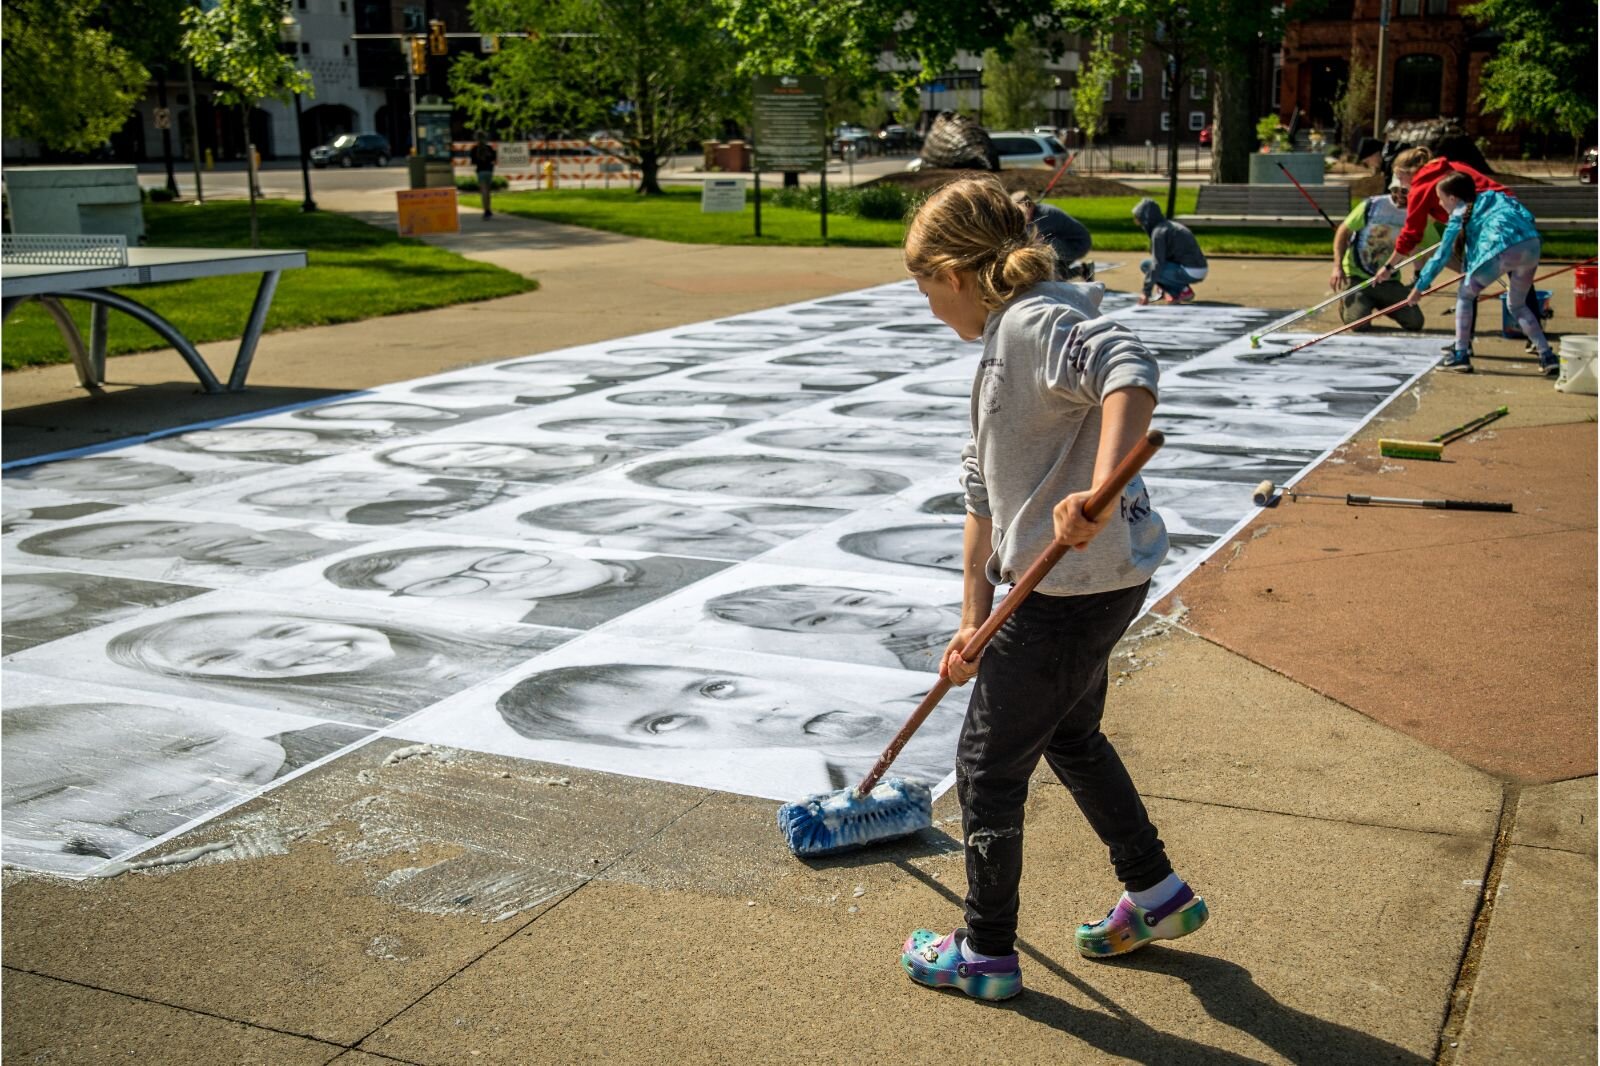 Most students won't see their portraits until Friday's All-District Art Fair, but a few helped affix the portraits to the sidewalks.